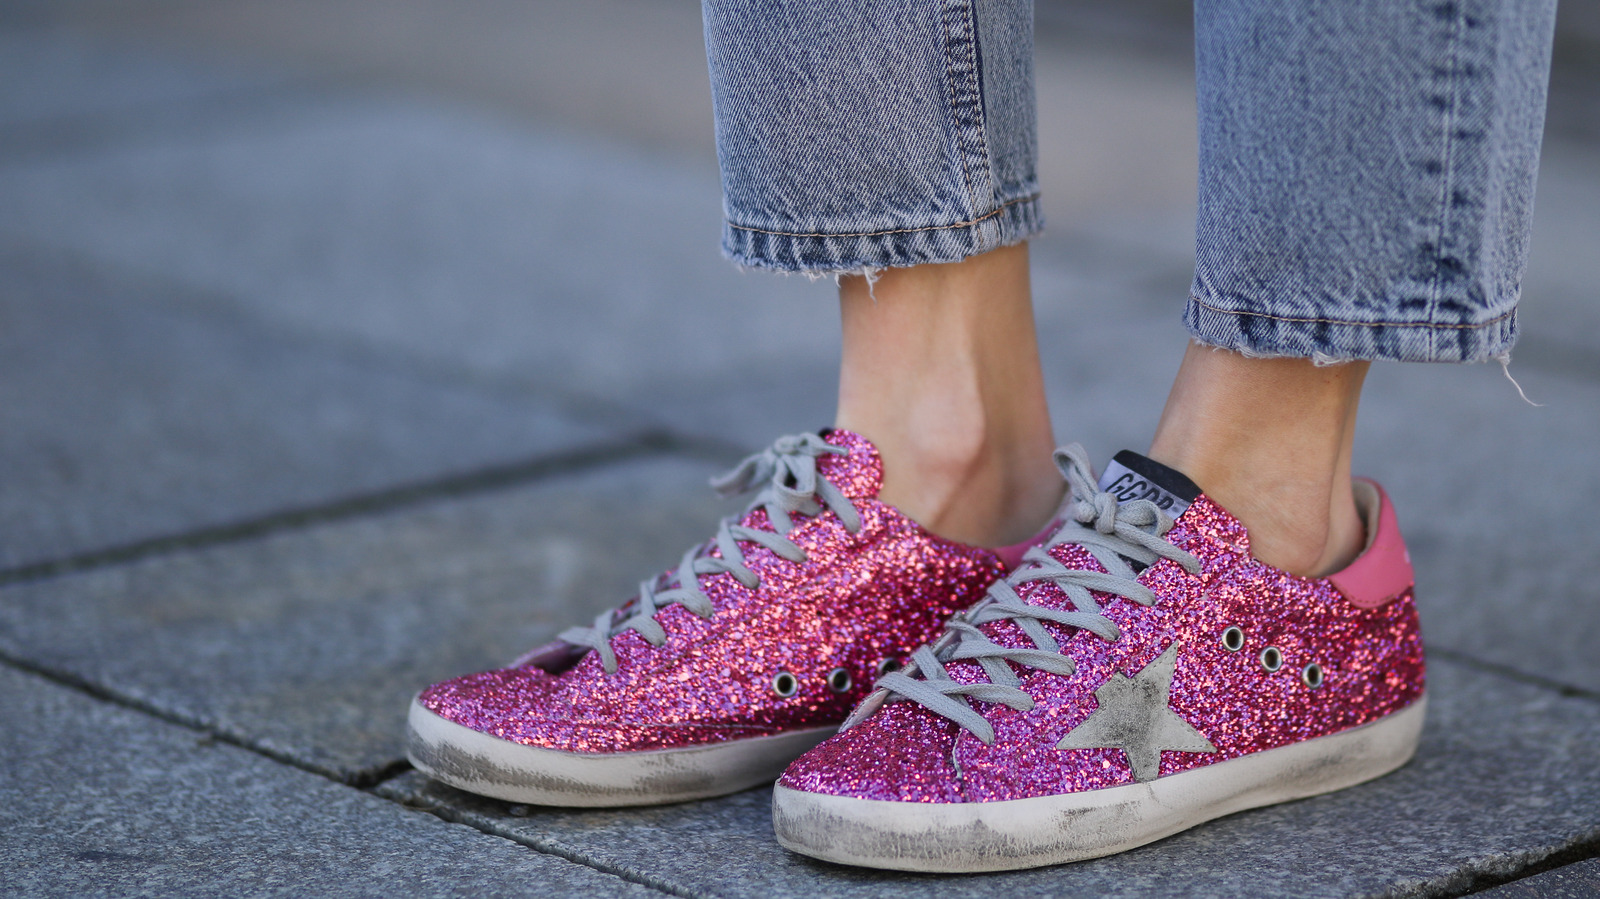 What Is The Appeal Of Golden Goose Sneakers? – Glam